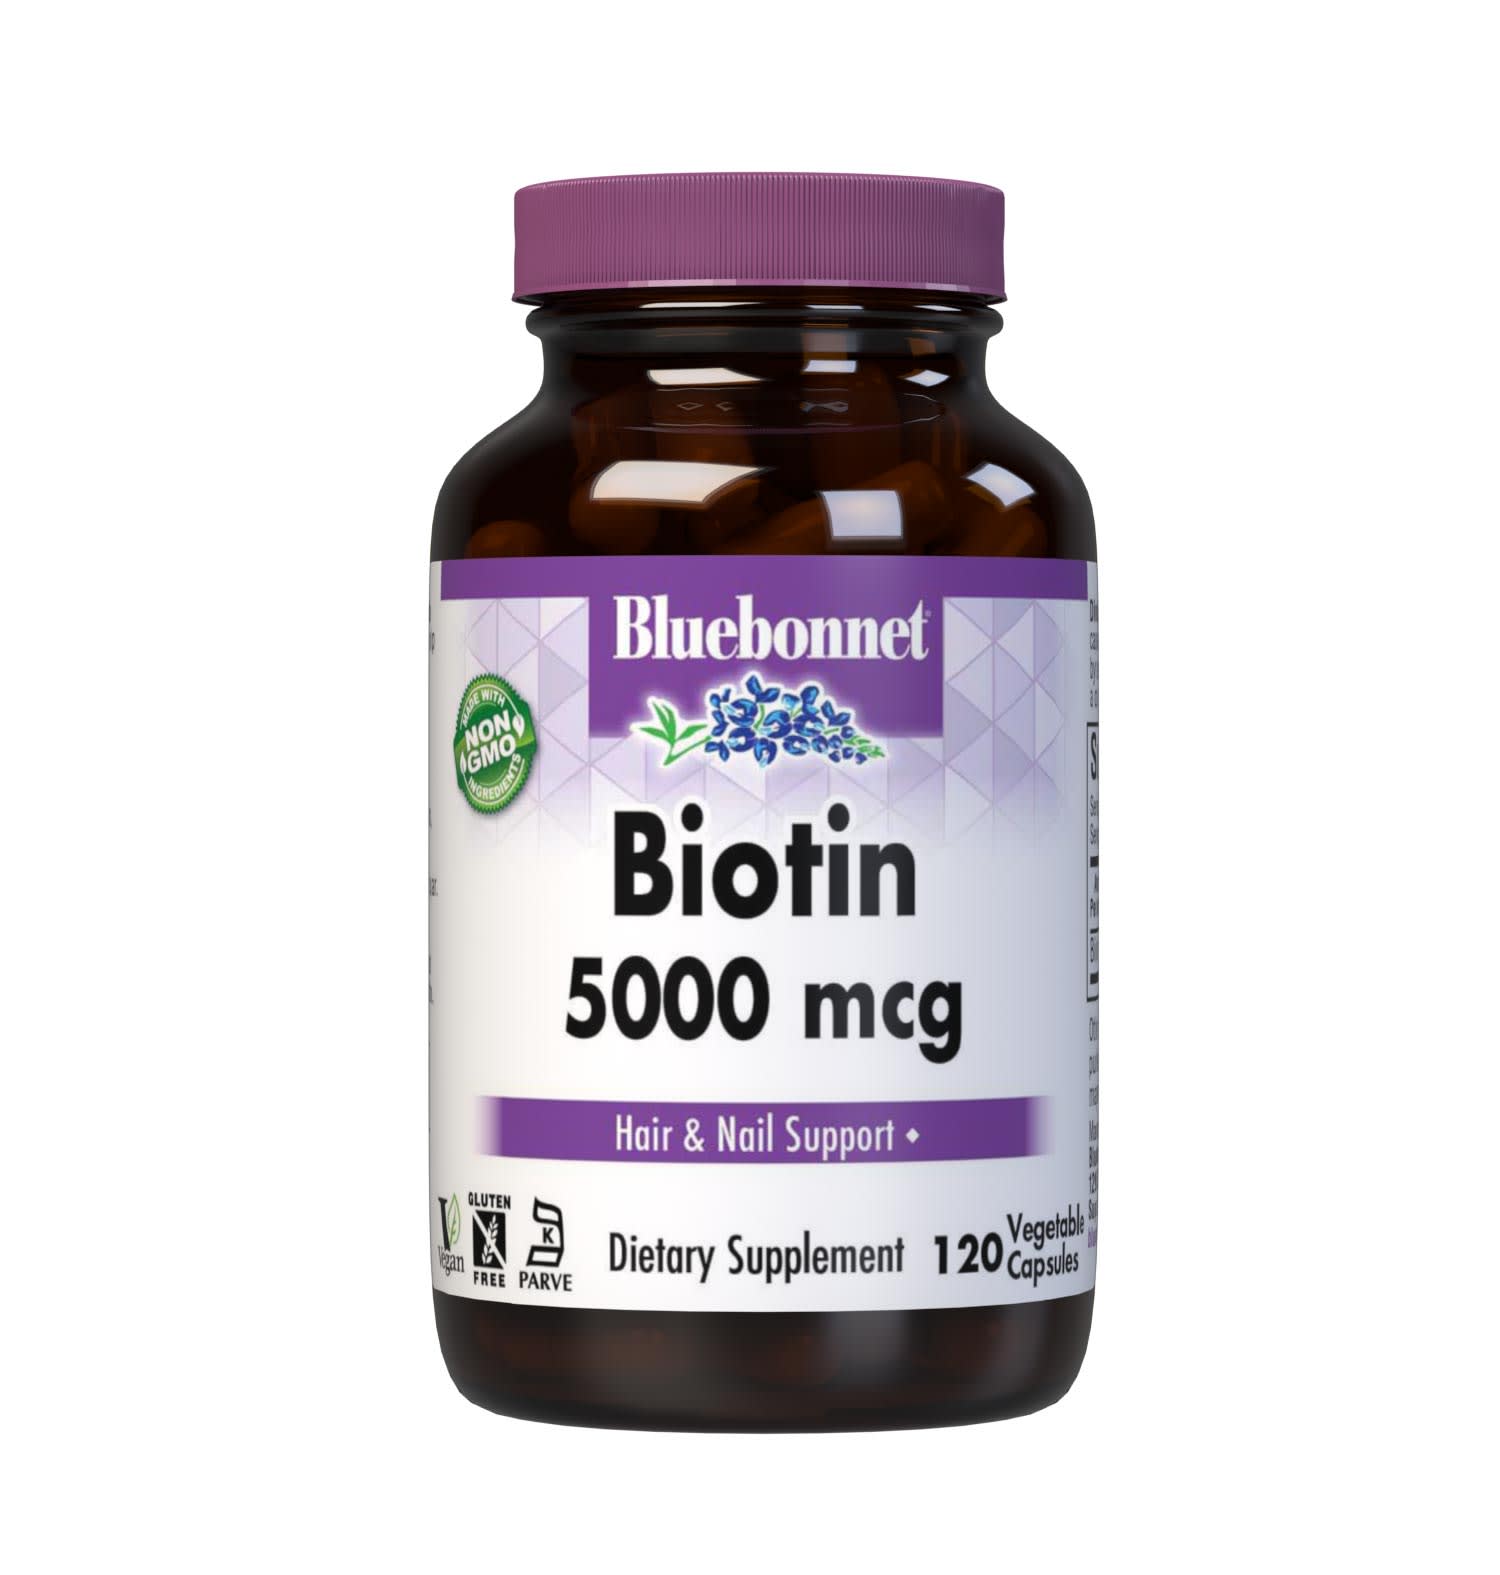 Bluebonnet’s Biotin 5000 mcg Capsules are formulated with yeast-free biotin in its crystalline form to support healthy hair and strong, durable nails. #size_120 count